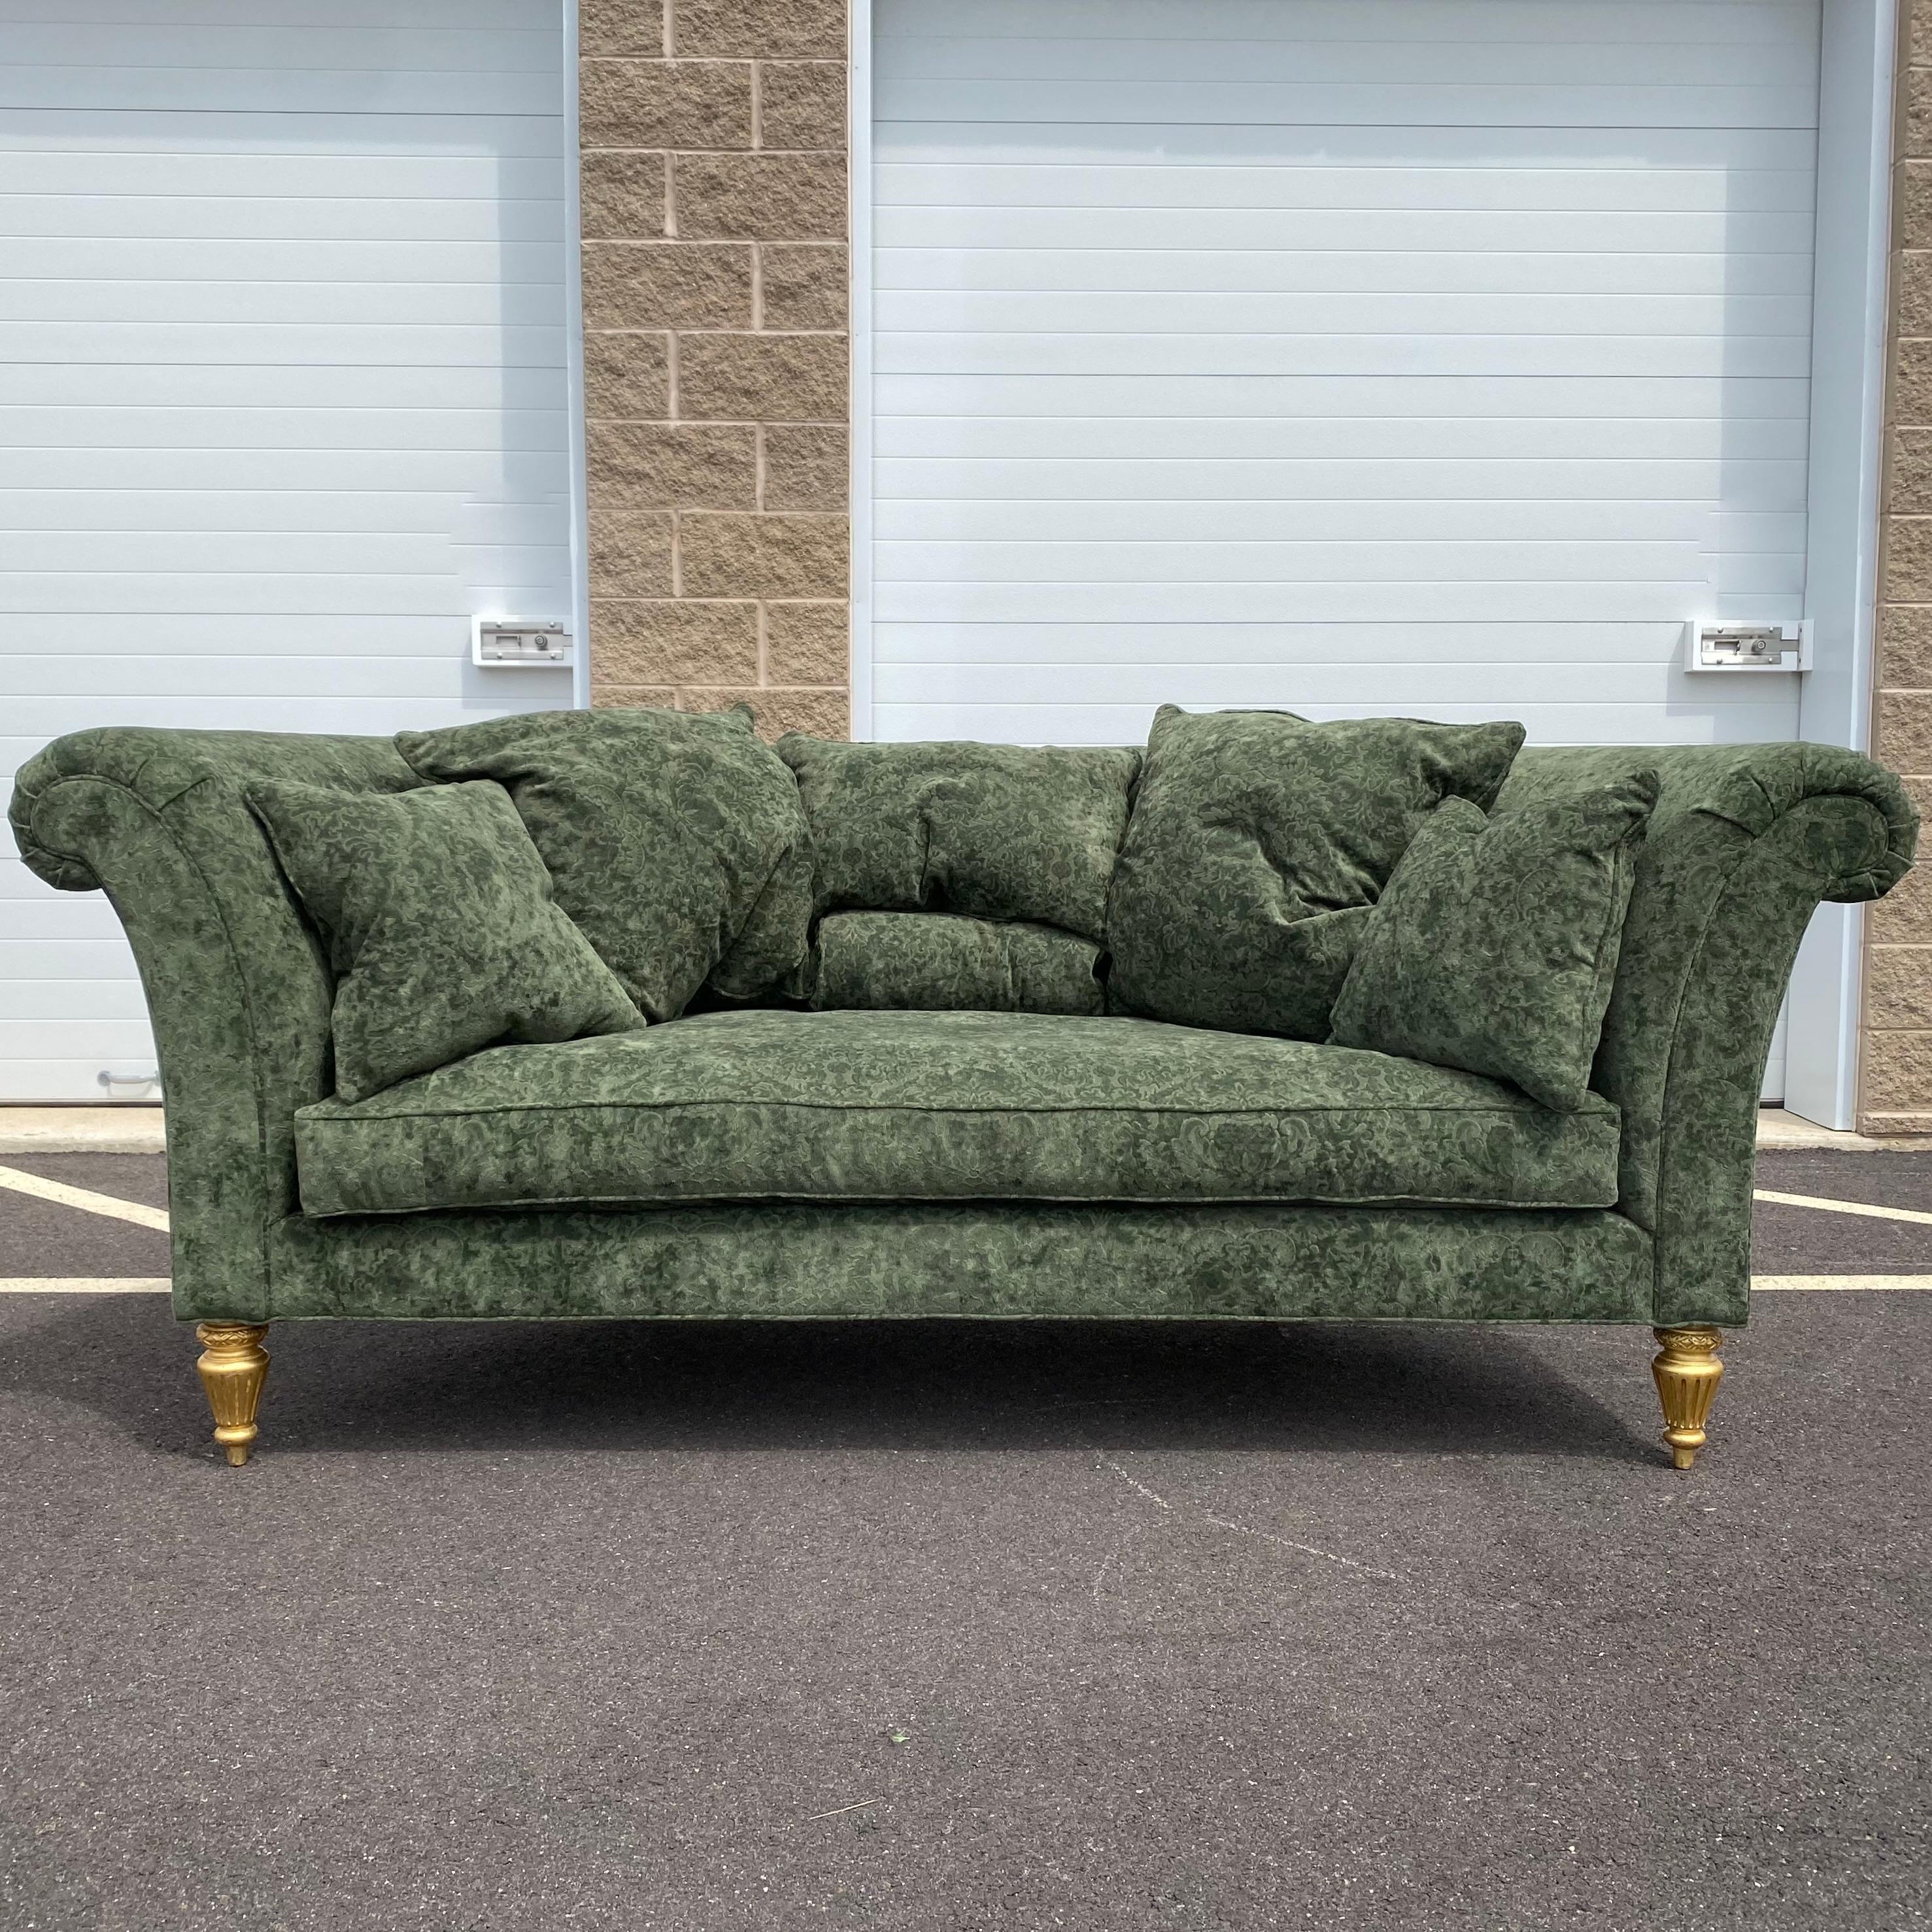 Upholstery Henredon Schoonbeck Collection Green Damask Demilune Sofa With Six Throw Pillows For Sale